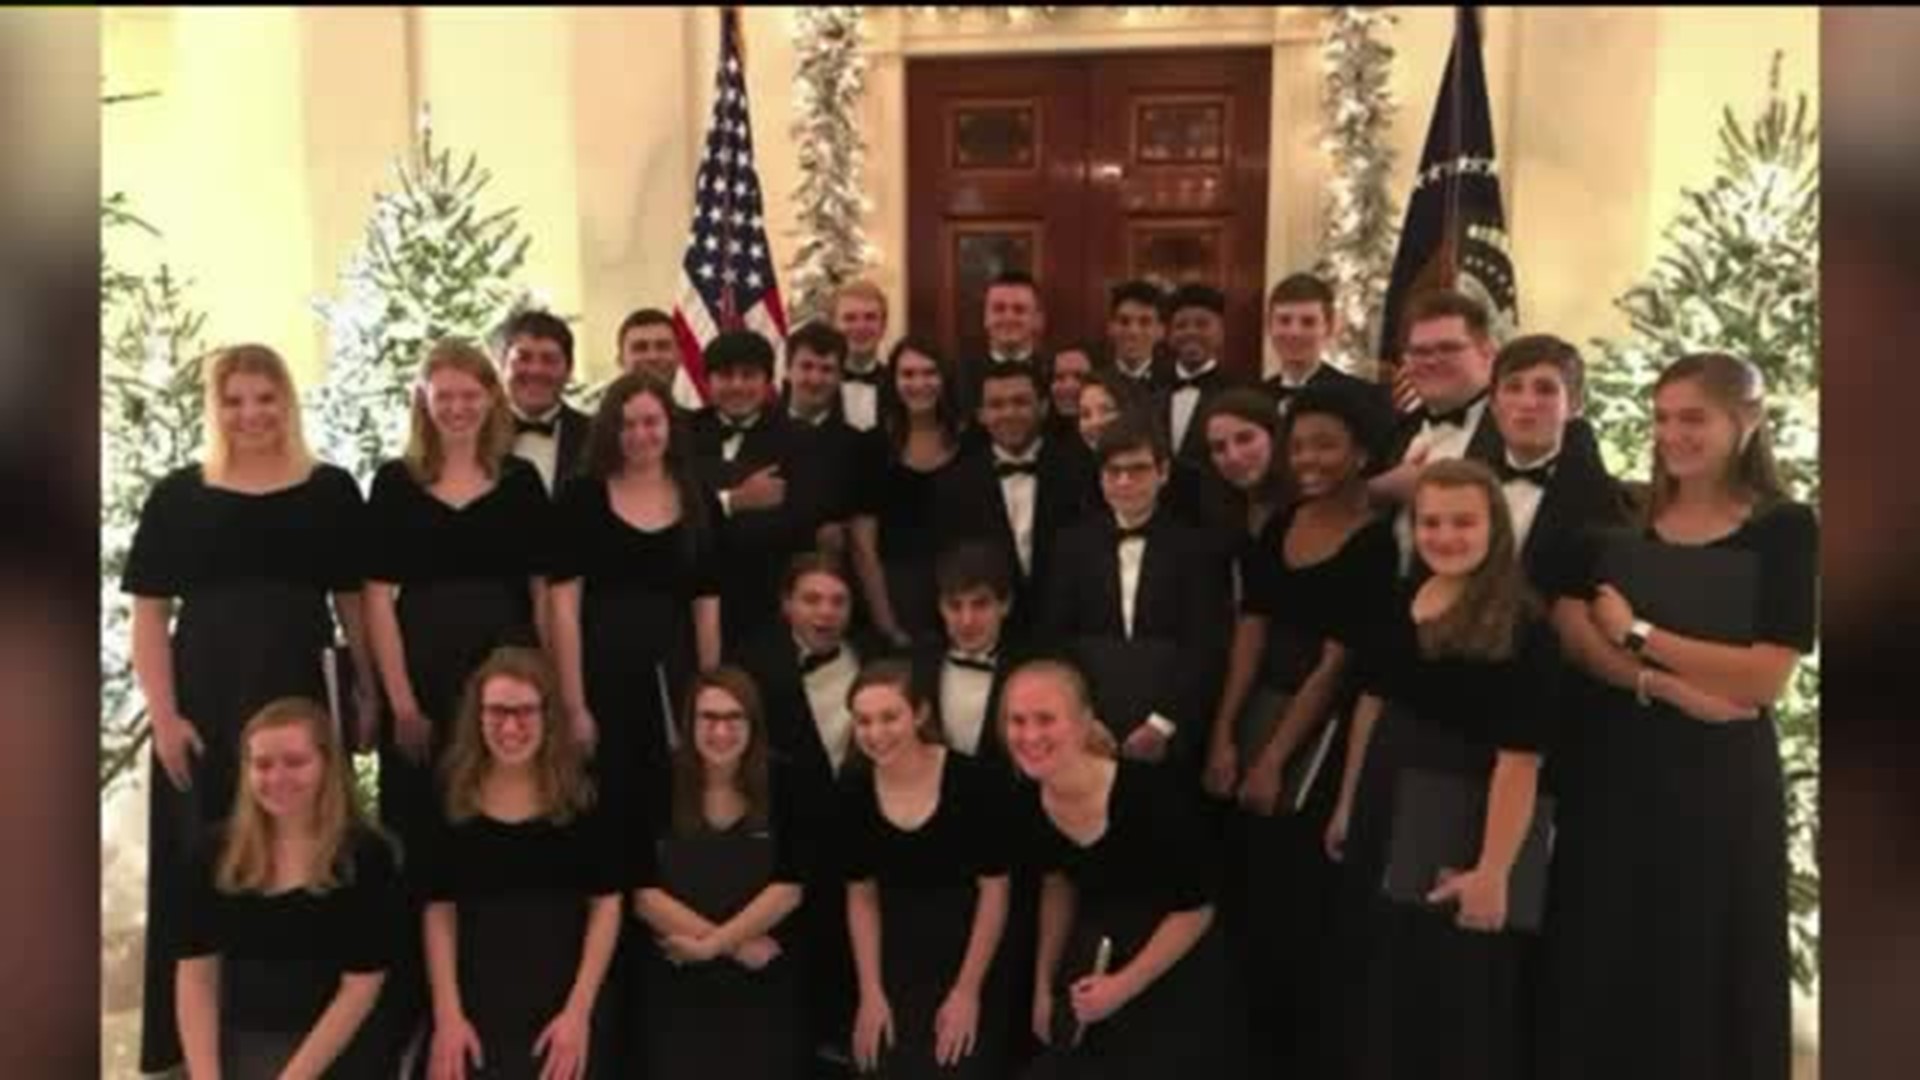 Students from Williamsport Sing at White House